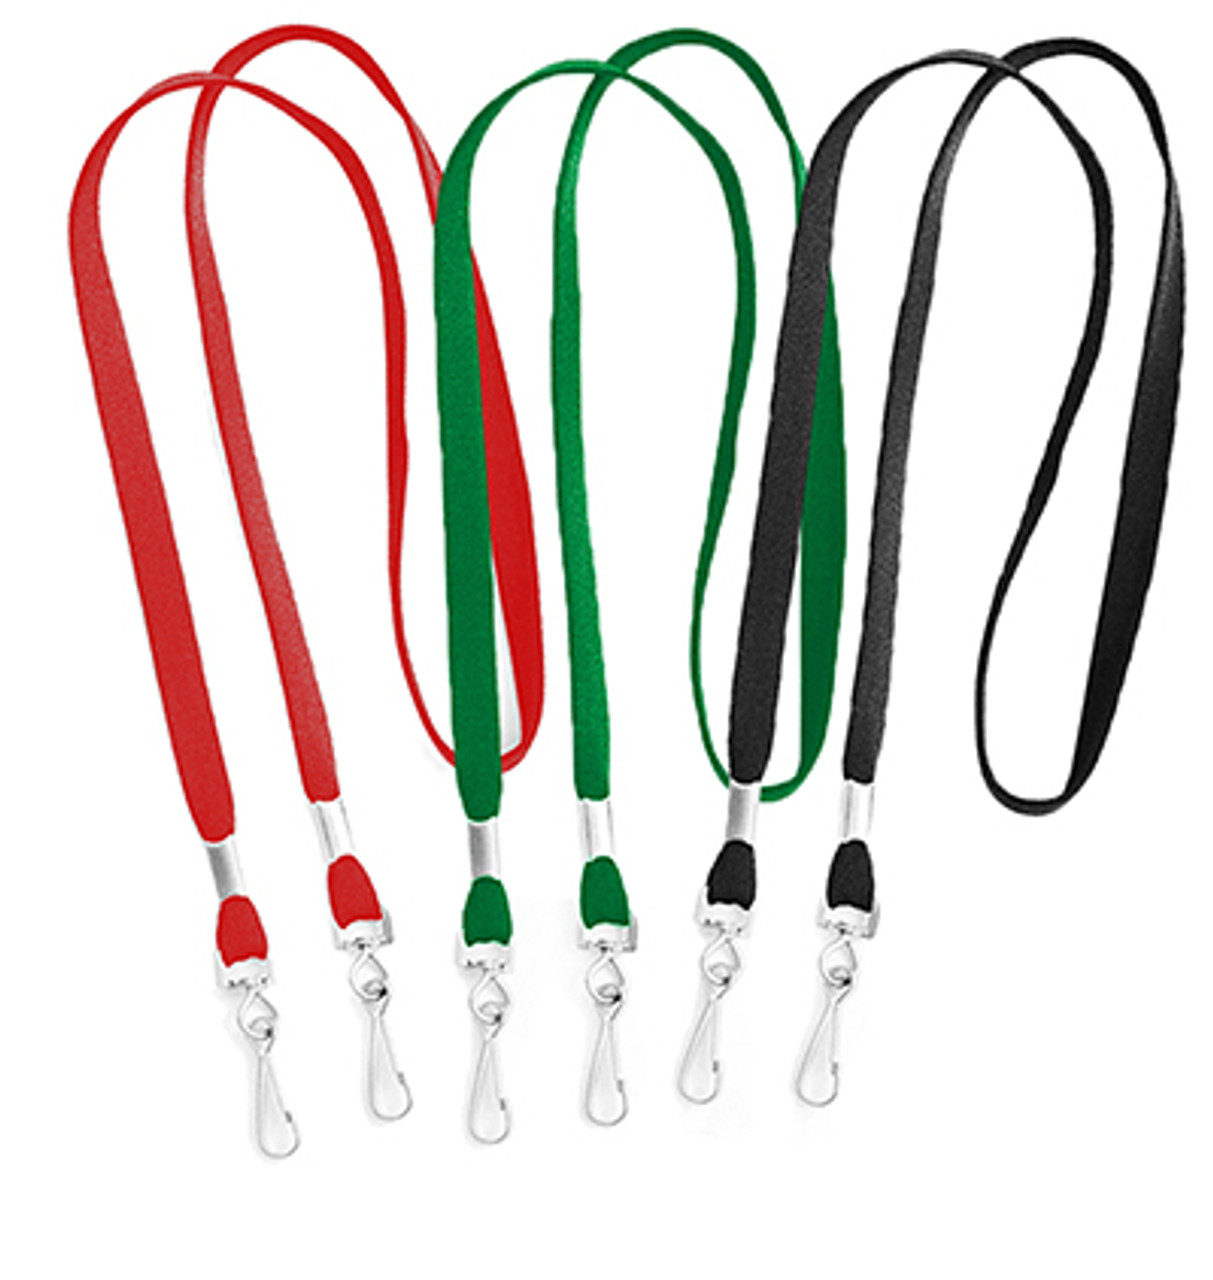 Fabric Open-Ended Lanyard with Dual Steel Swivel J Hooks - 3/8 inches wide  - Pack of 50 